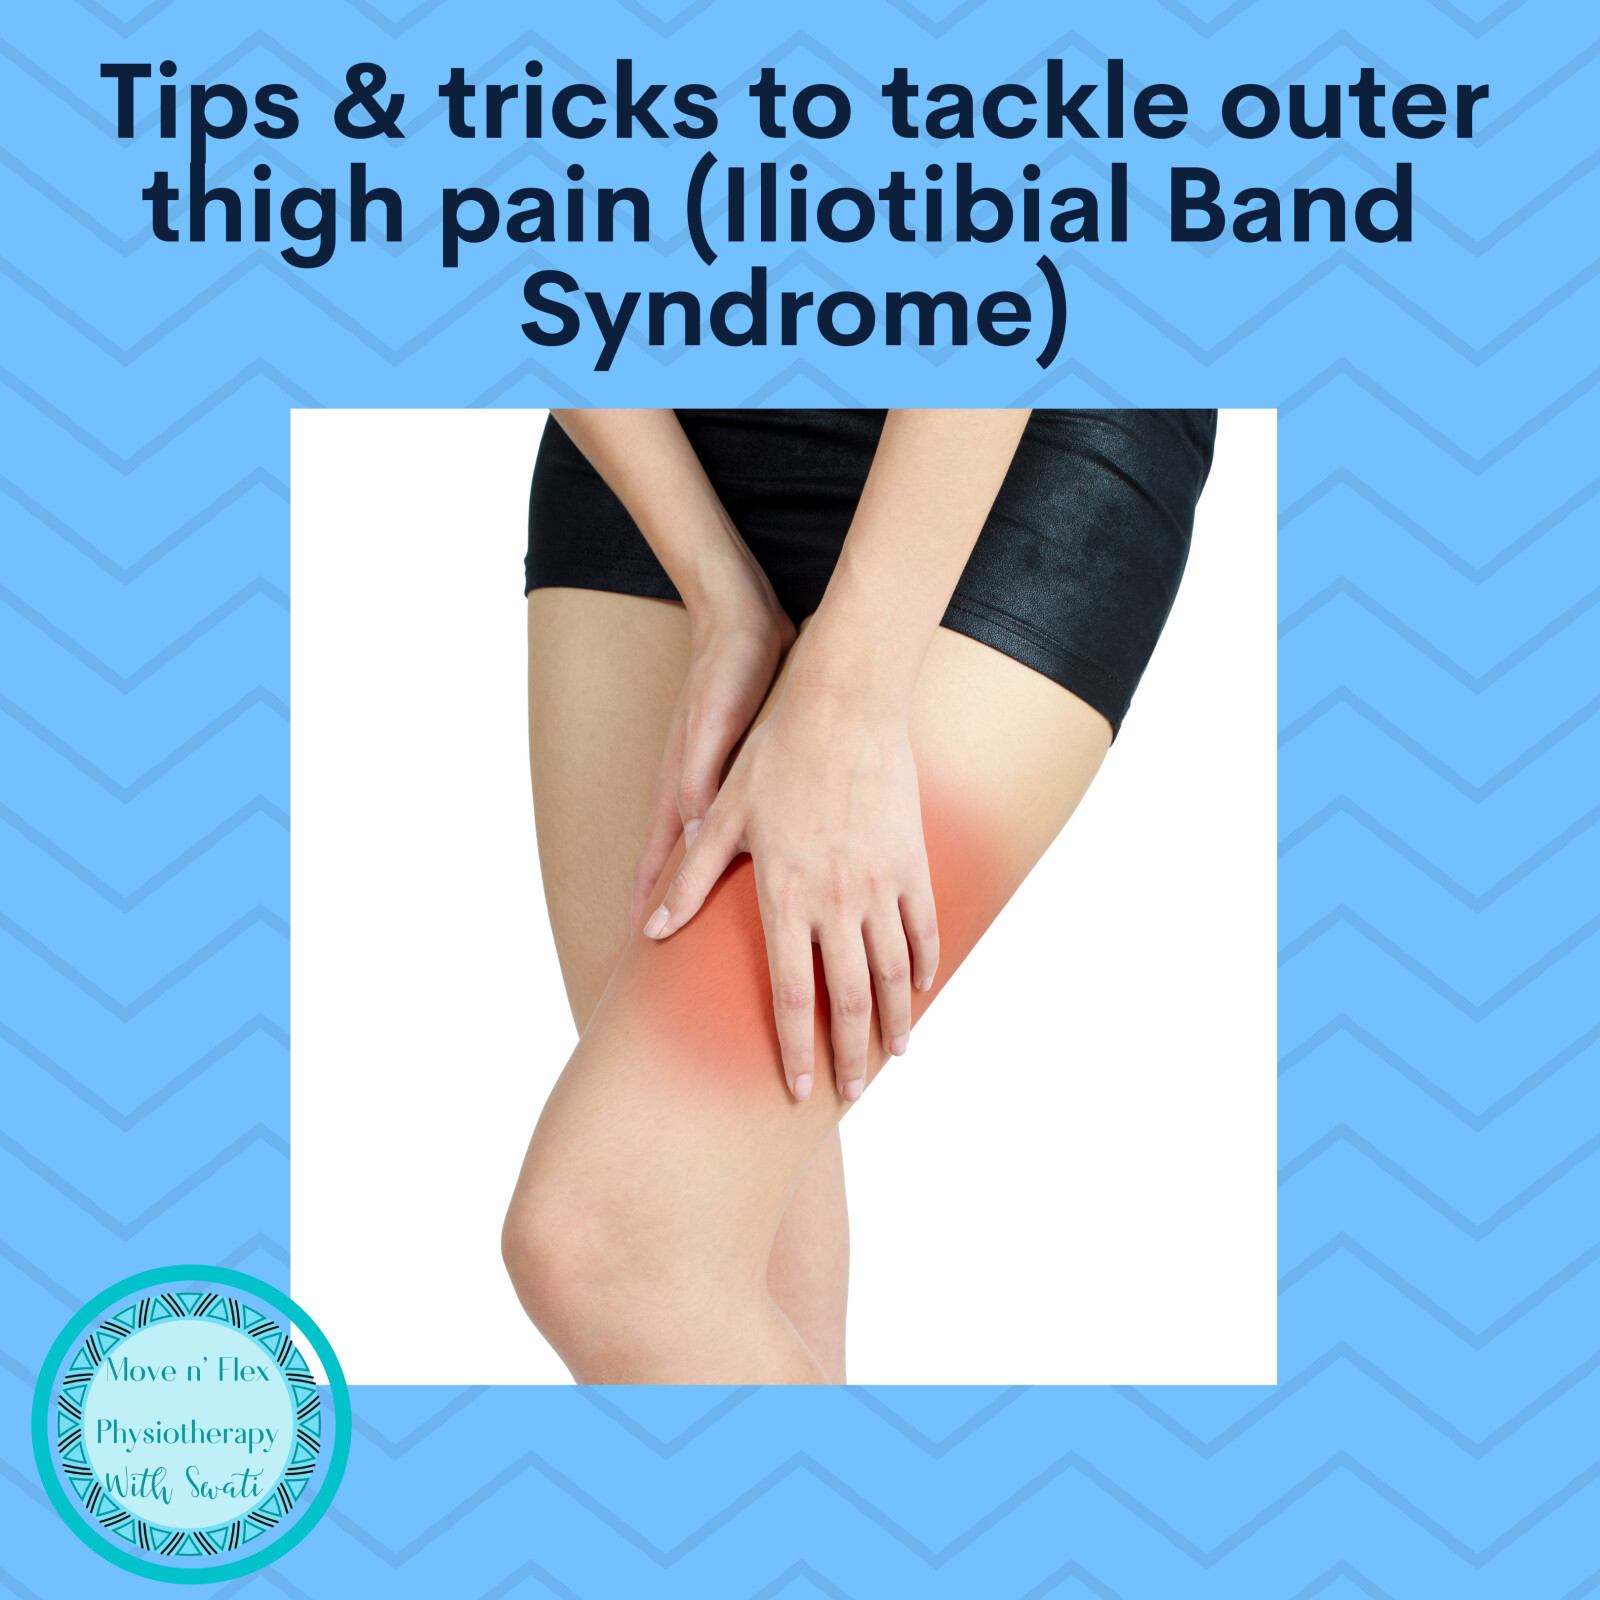 Tips and tricks to manage outer thigh pain caused by Iliotibial Band Syndrome (Part 2)